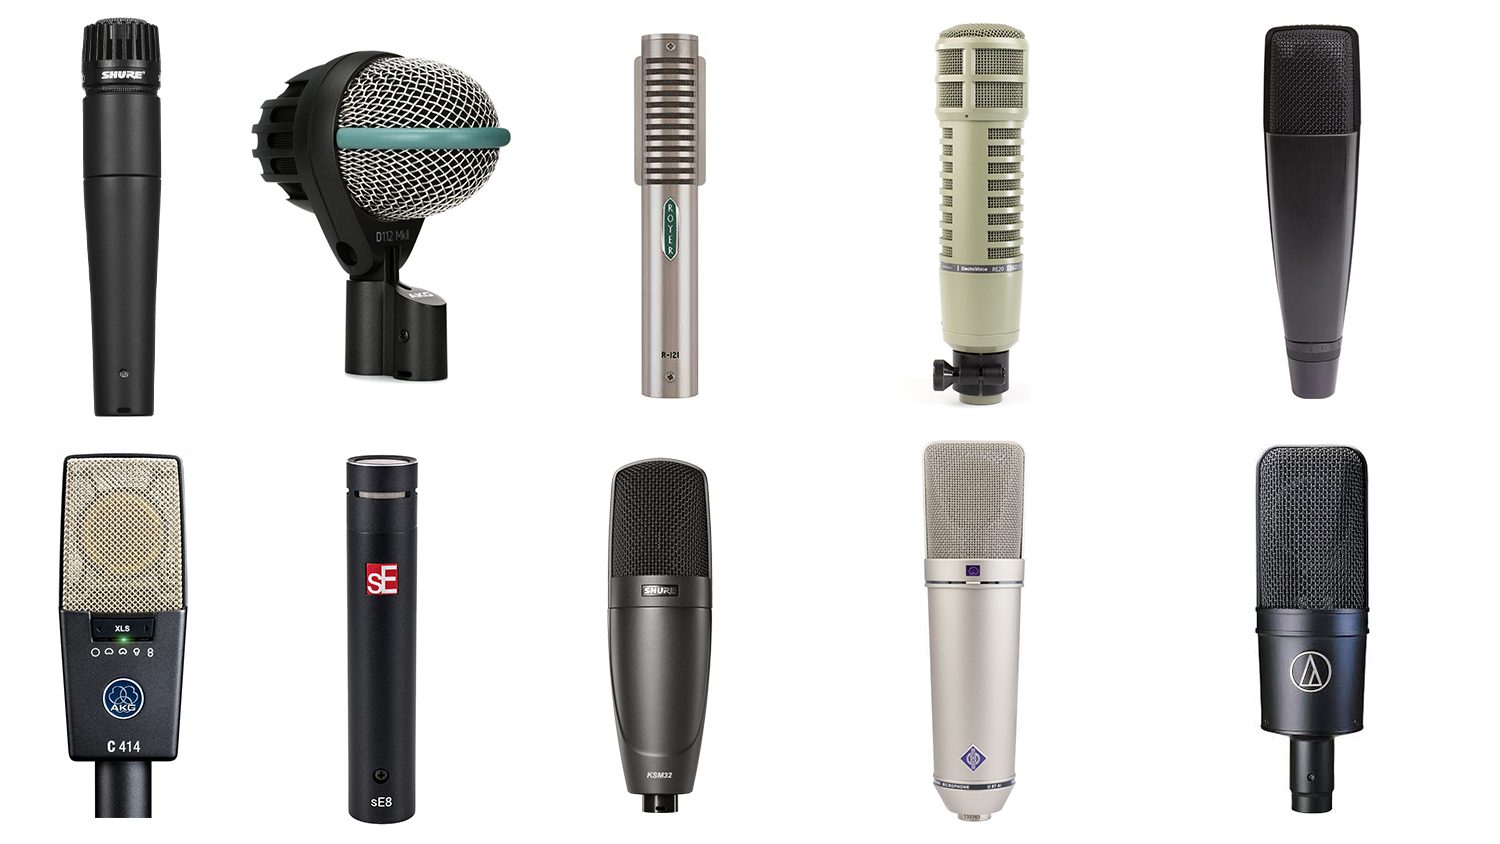 The Top 10 microphones you need for your studio